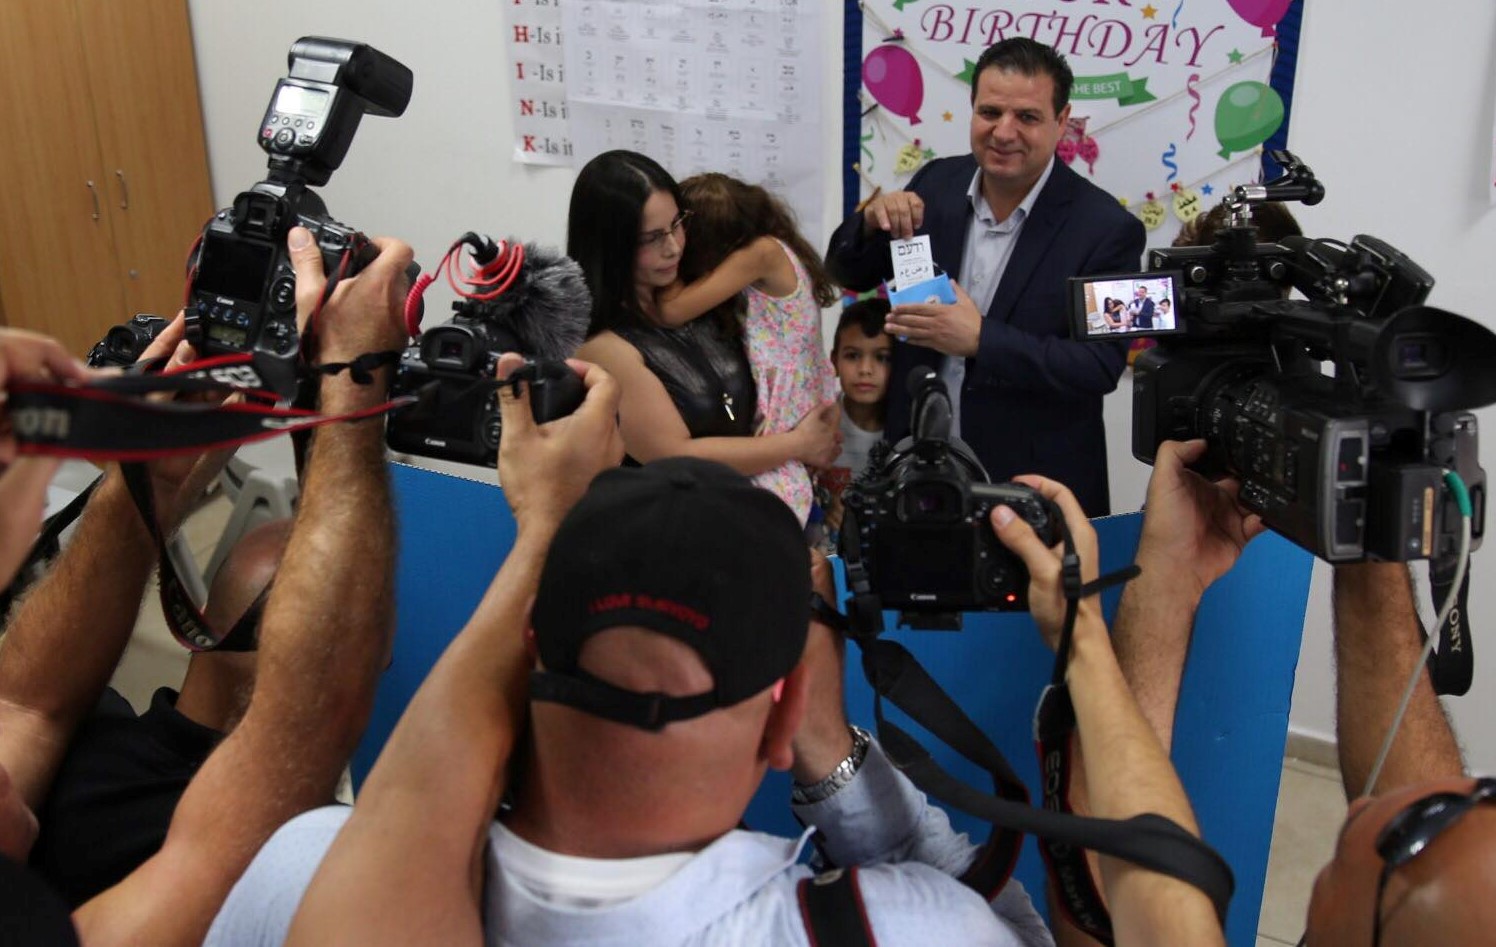 Joint List leader, MK Ayman Odeh (Hadash), accompanied by his young family, casts his ballot in Haifa on Tuesday morning, September 17.